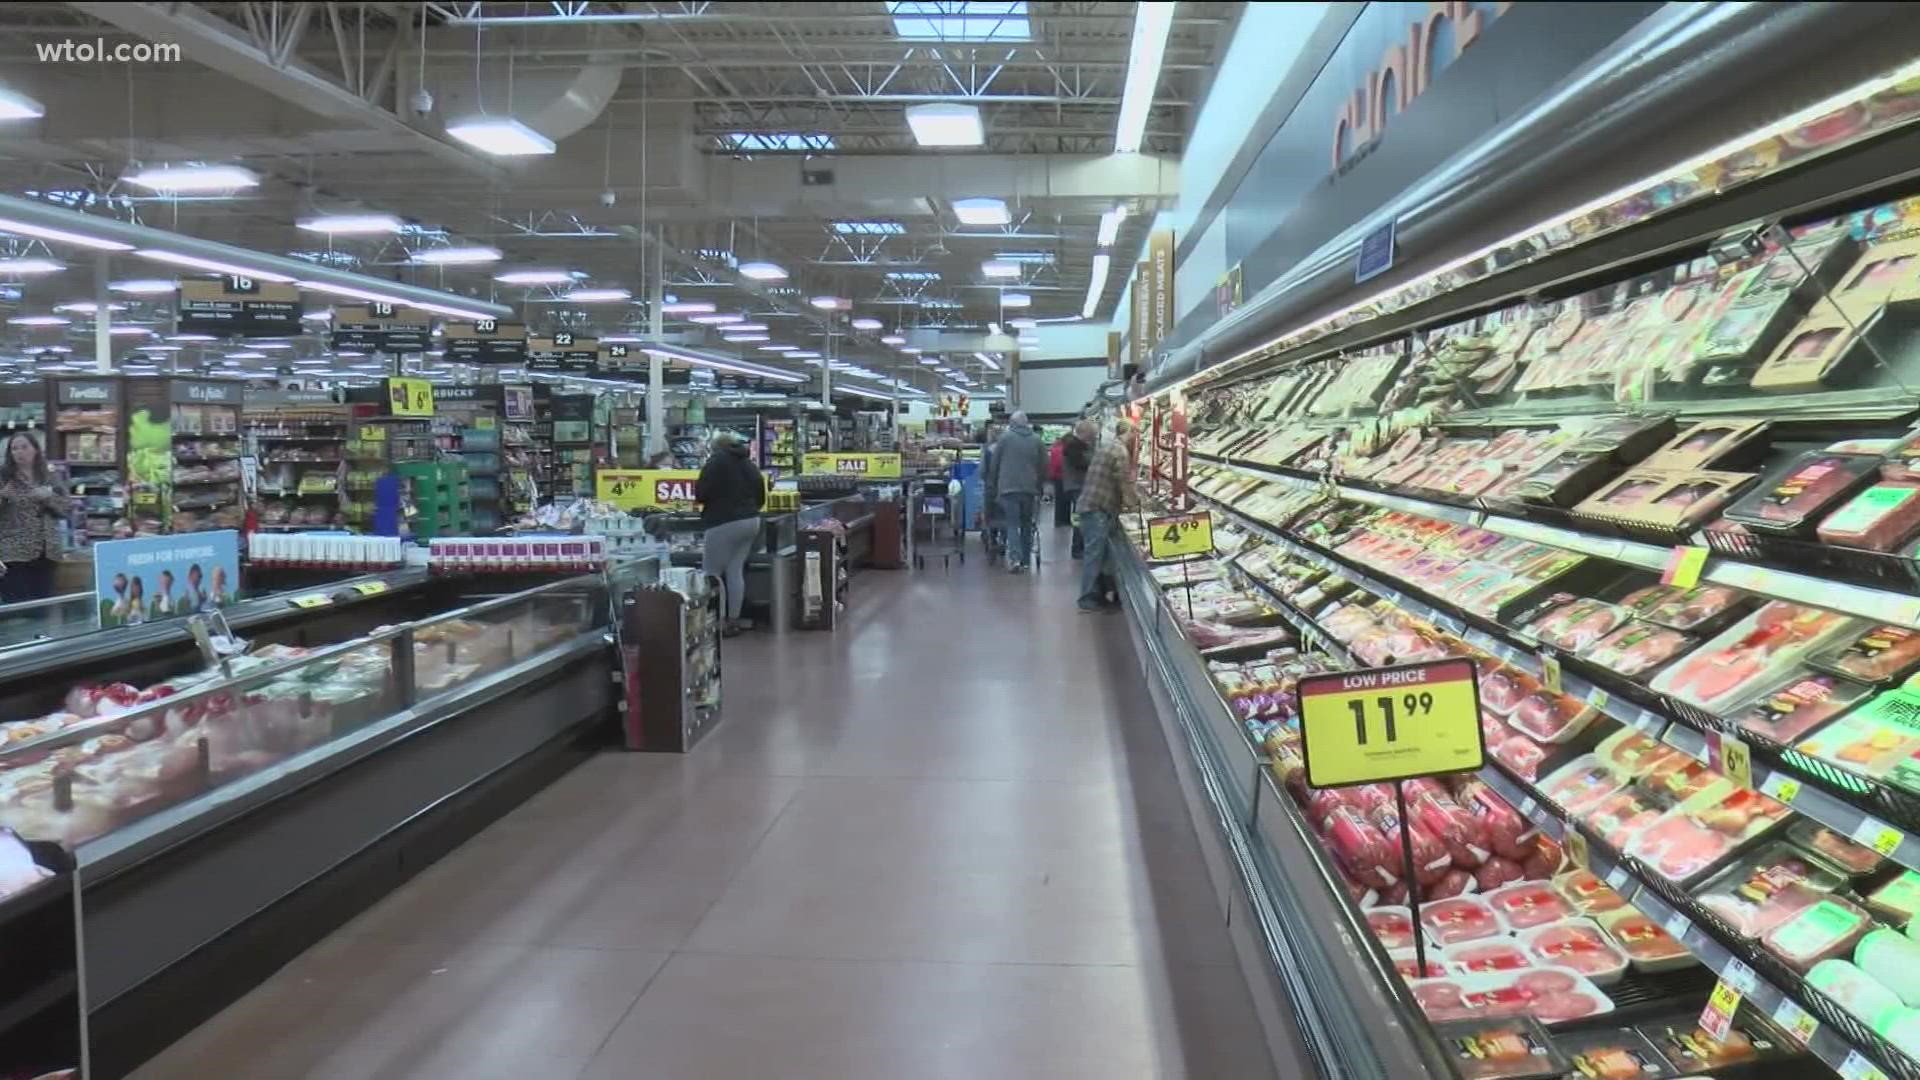 With grocery prices increasing we talk with a local expert on ways you can save money when heading to the grocery store.